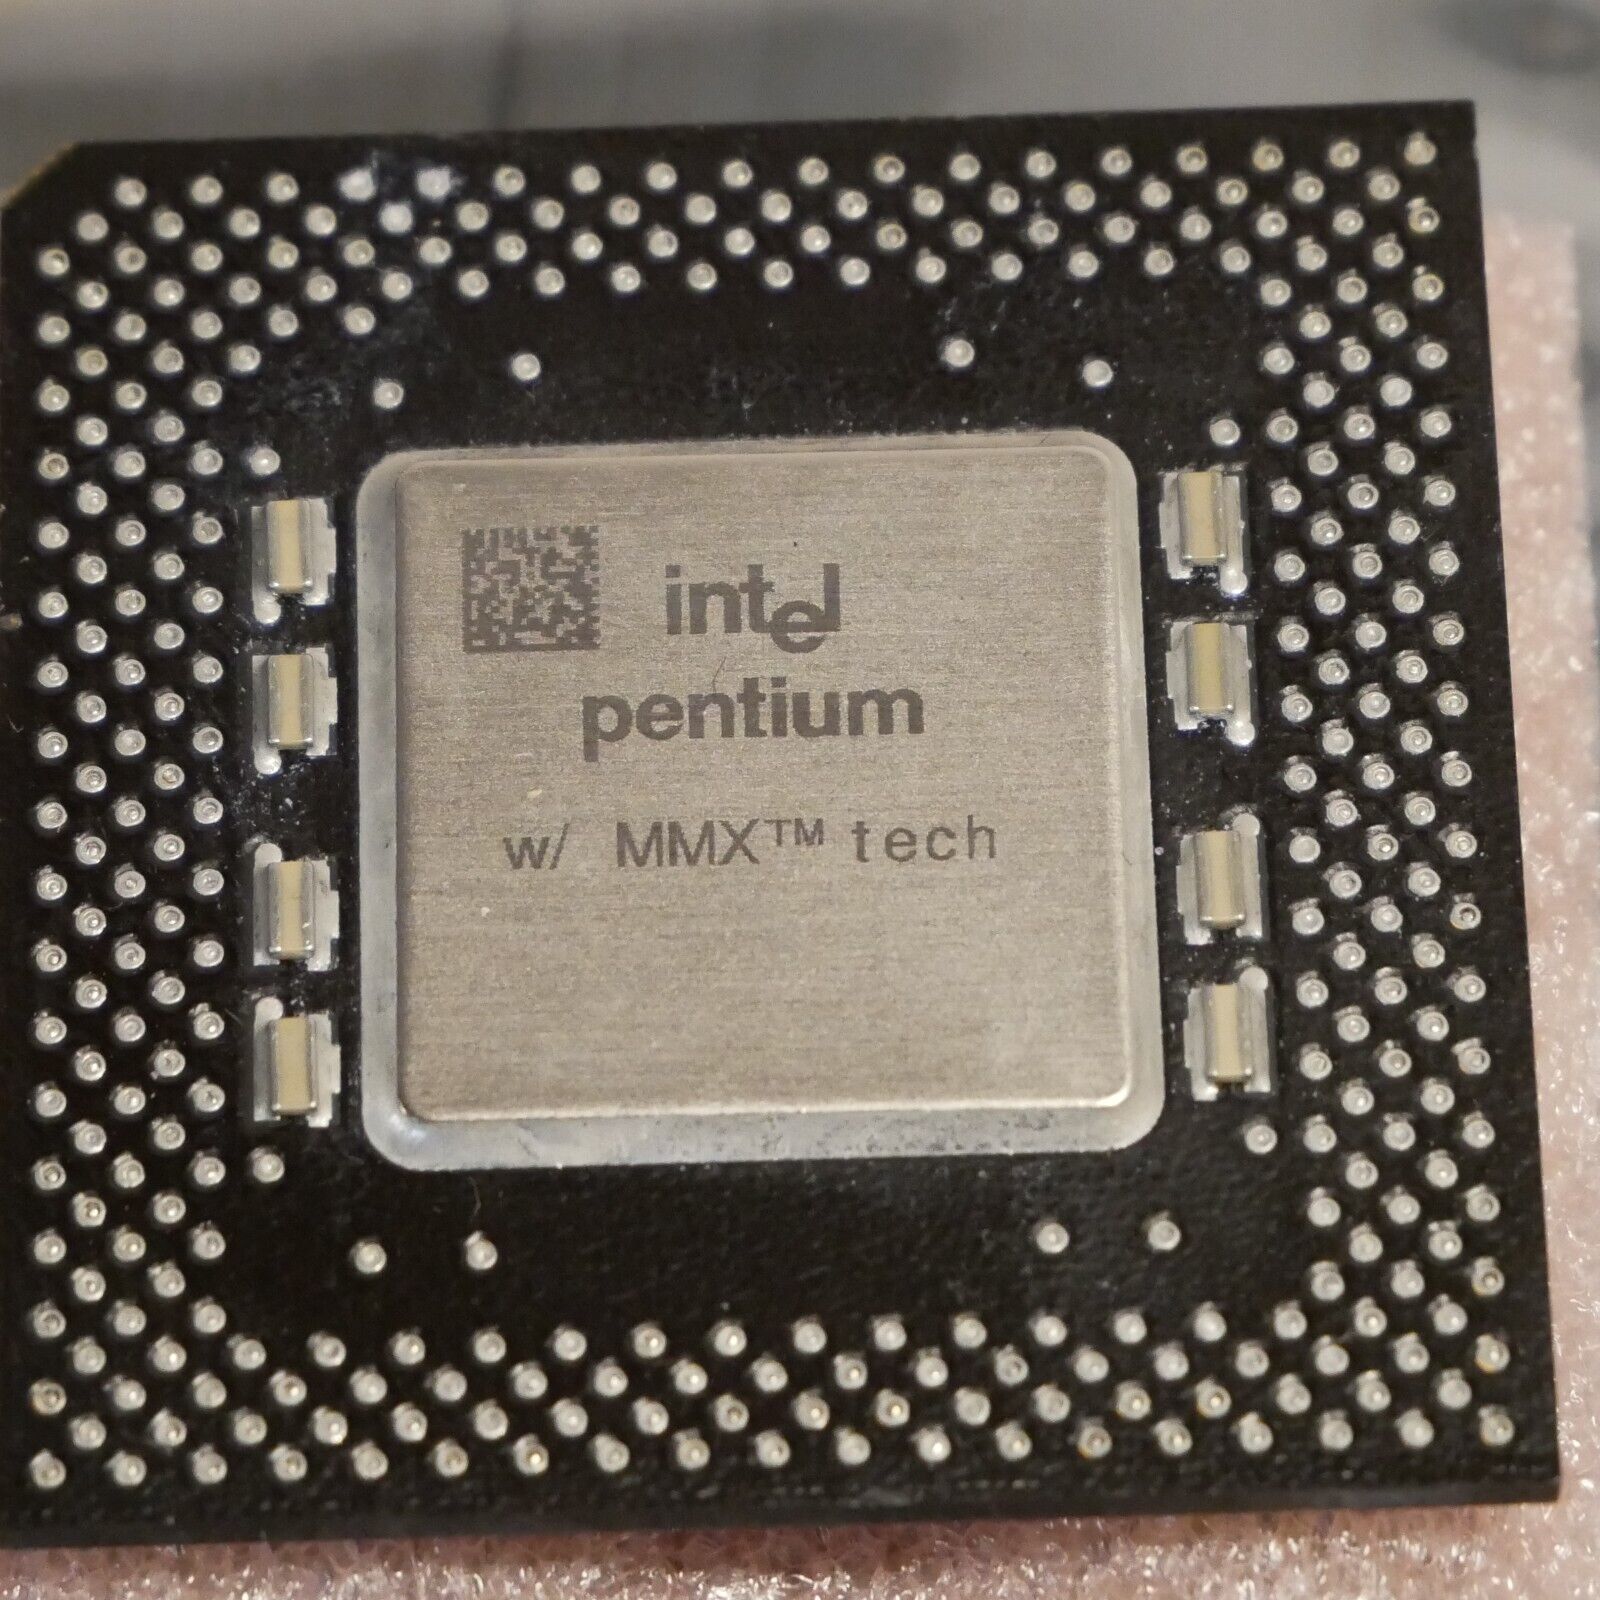 Primary image for Intel Pentium P166 A80503166 166MHz CPU Processor with MMX - Tested & Working 11